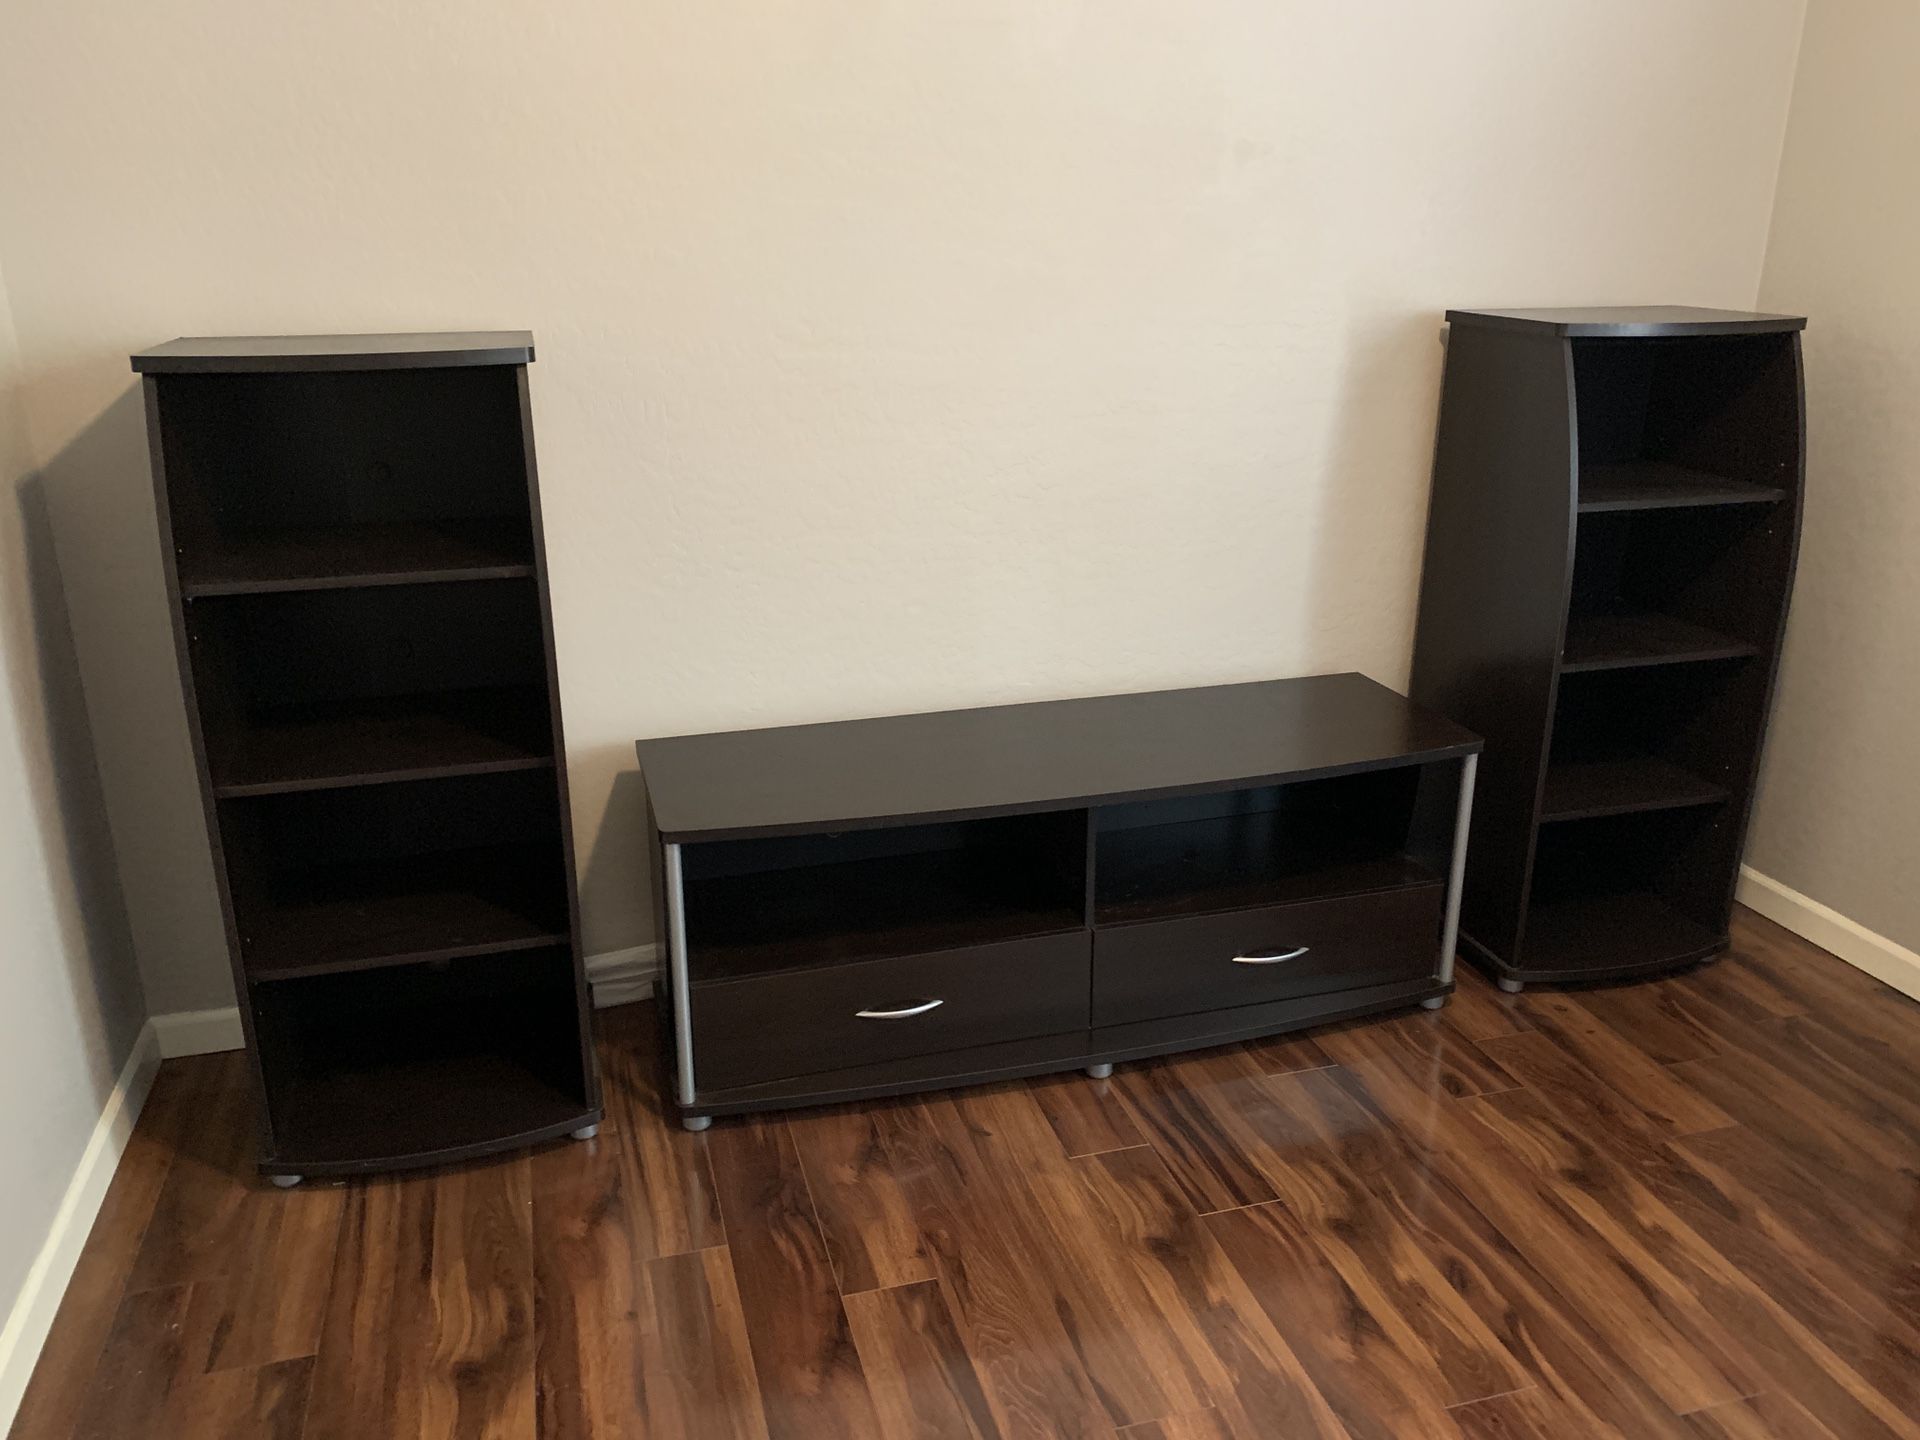 Priced to Sell Today!!! TV Stand and bookshelf set, living room set